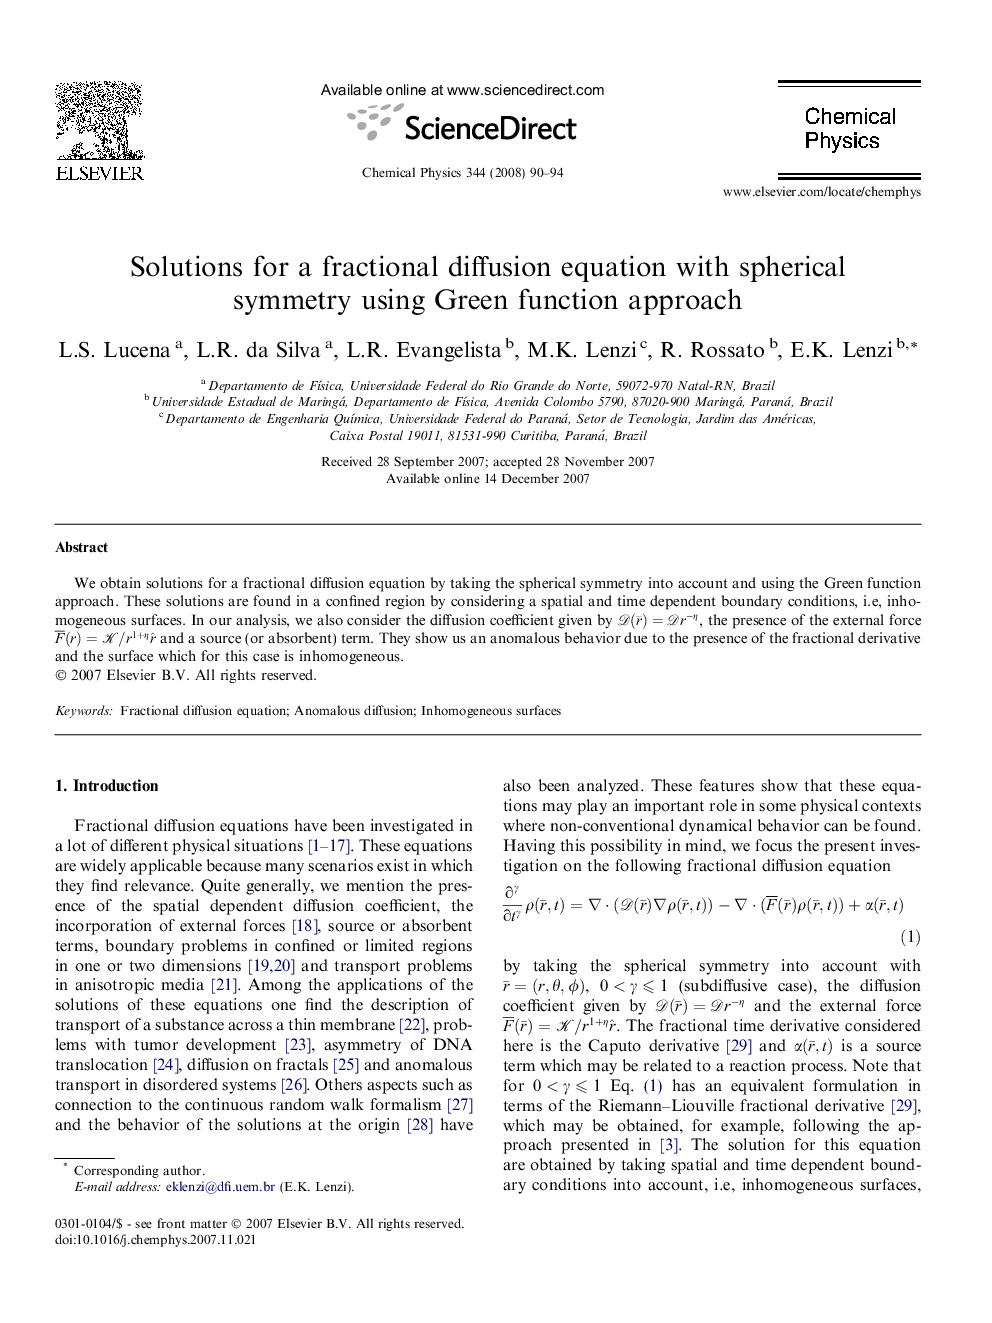 Solutions for a fractional diffusion equation with spherical symmetry using Green function approach